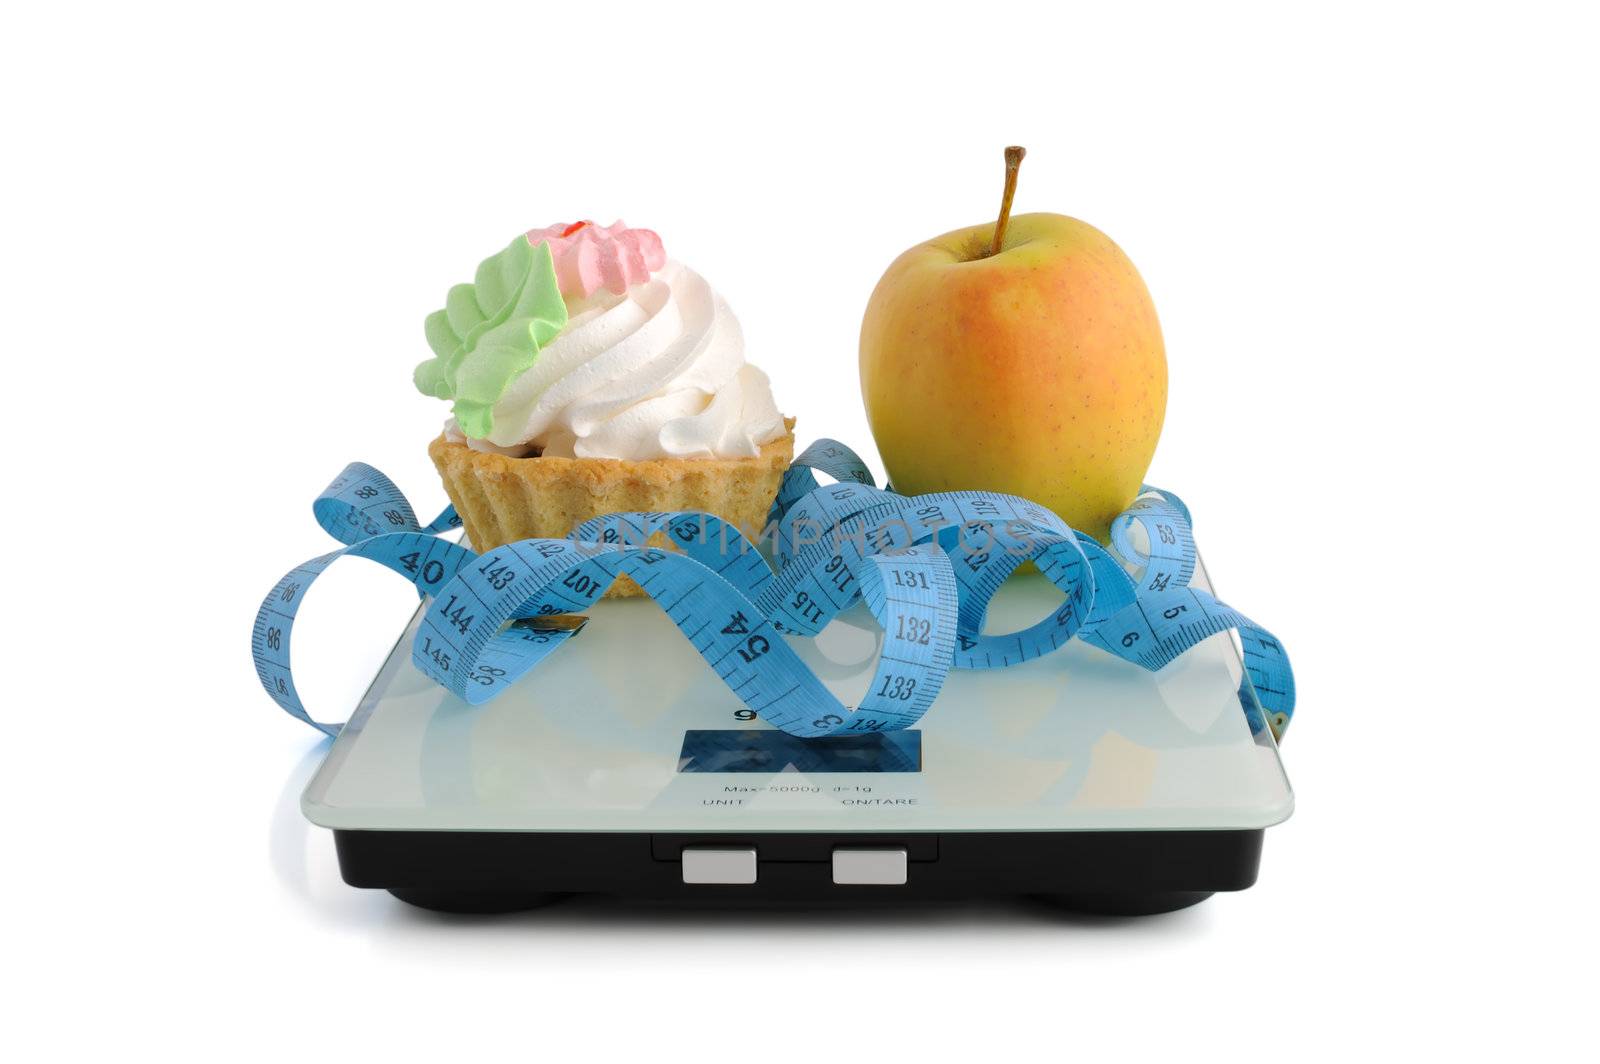 Cake and apple on scales measuring tape wrapped by Apolonia